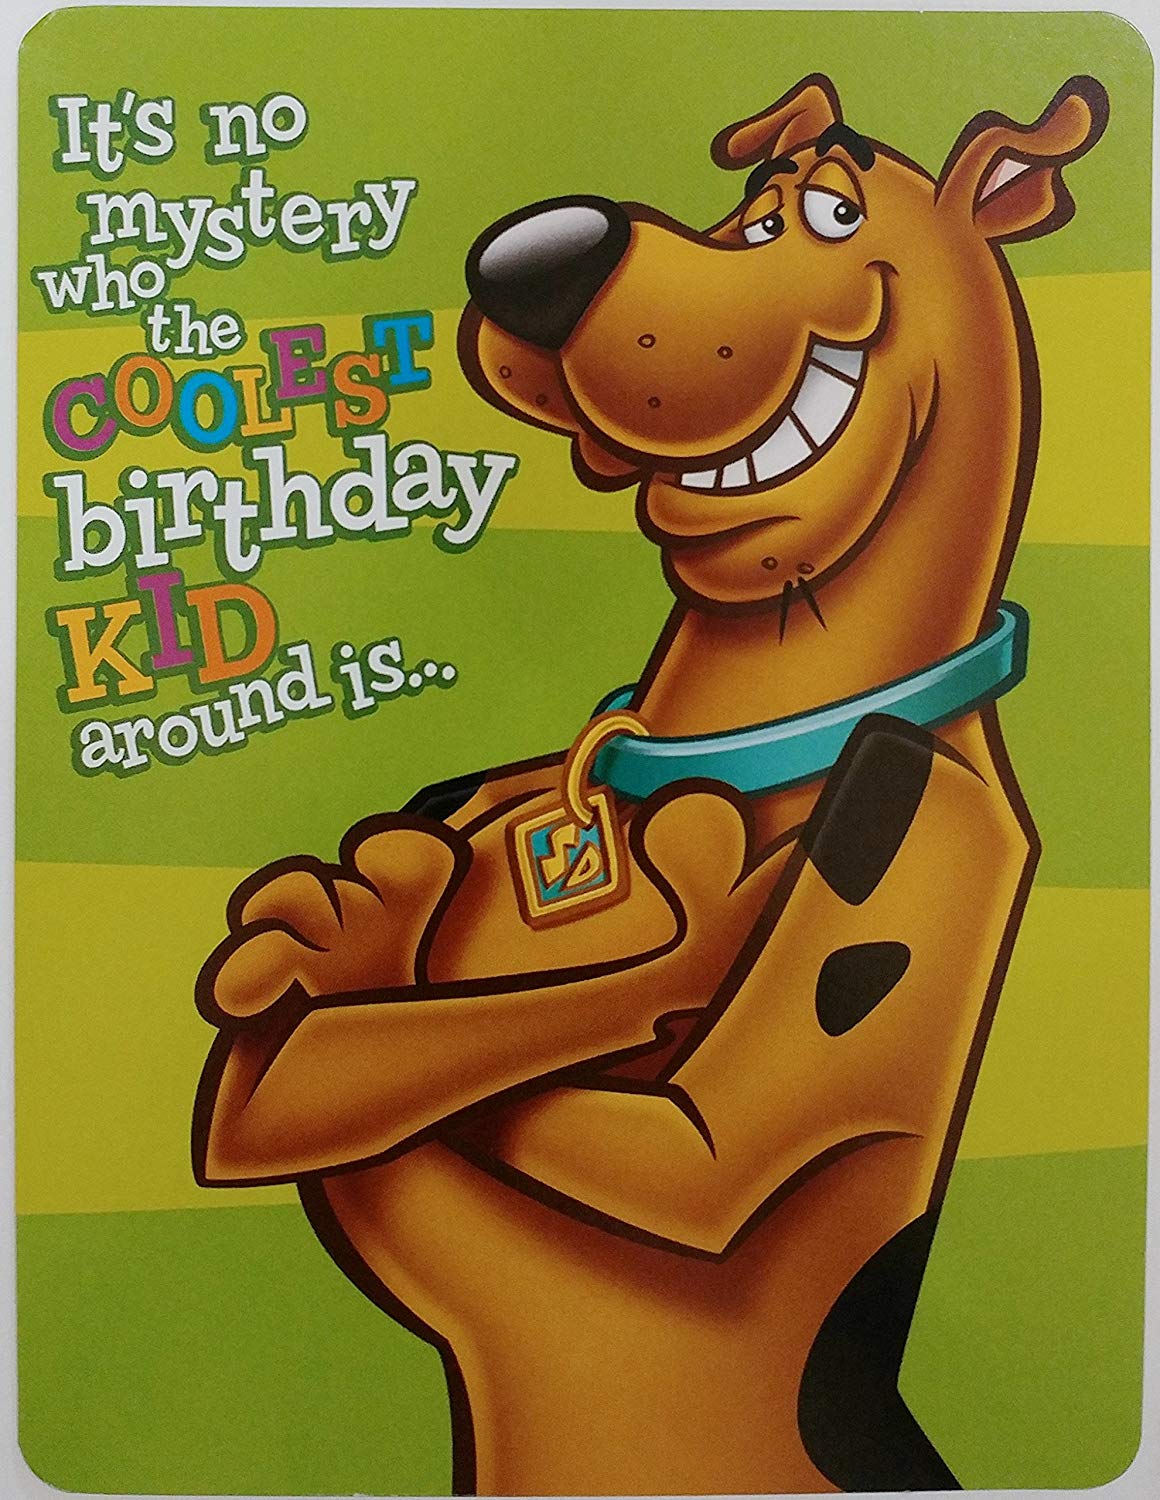 Scooby doo clipart happy, Scooby doo happy Transparent FREE for ...